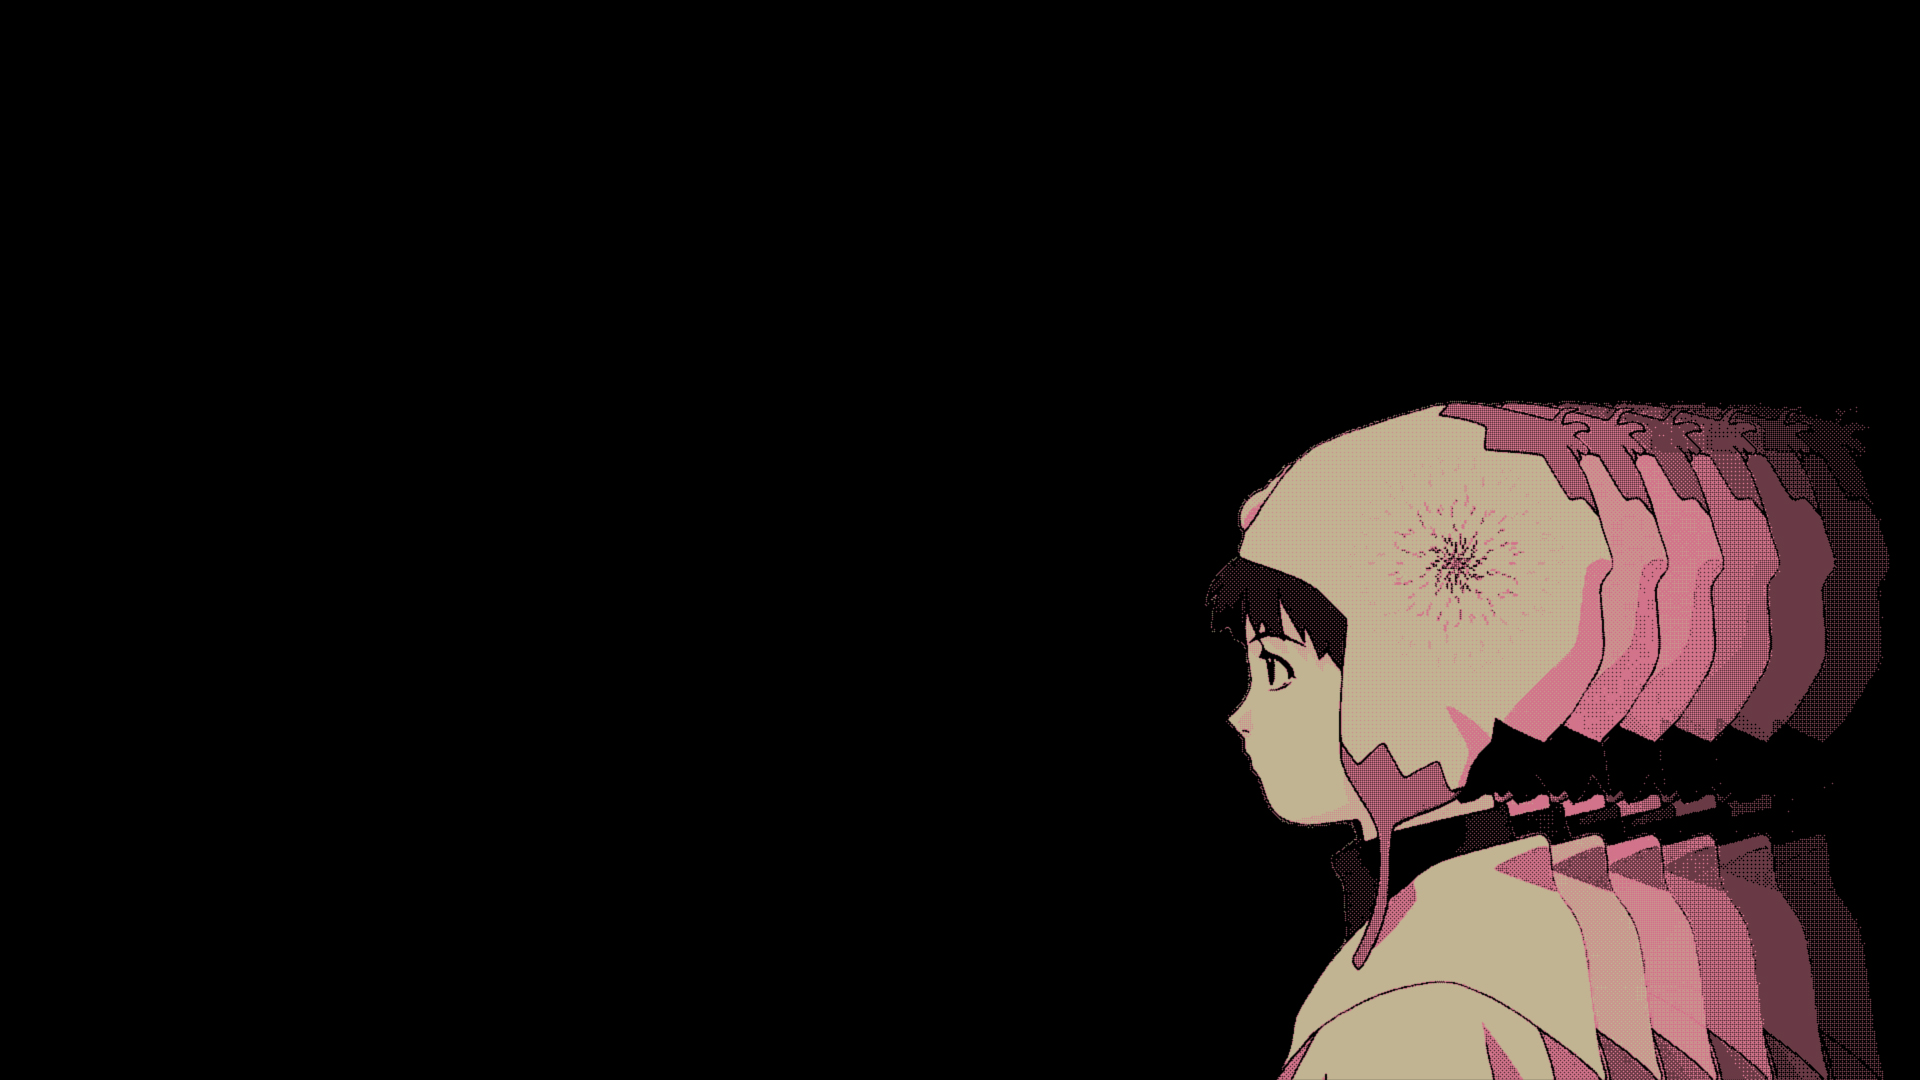 Free Download Lain Wallpapers Awesome Lain Pictures And Wallpapers 48 19x1080 For Your Desktop Mobile Tablet Explore 75 Lain Wallpaper Serial Experiments Lain Wallpaper